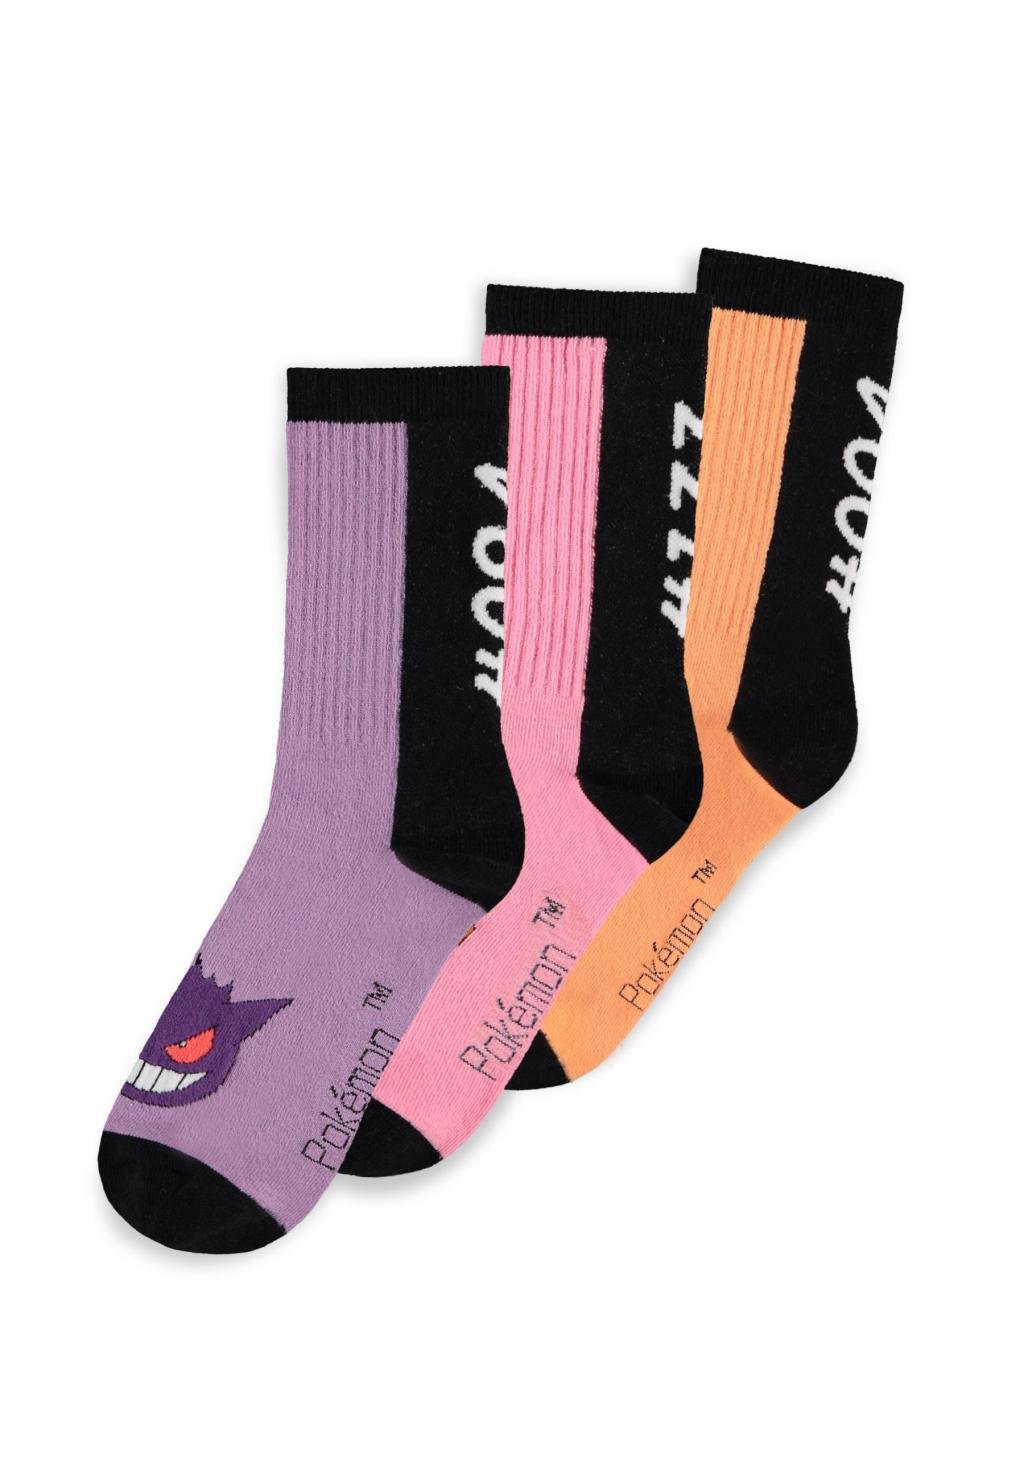 POKEMON - Trio Color - Pack of 3 pairs of Sport socks (S 3-5)